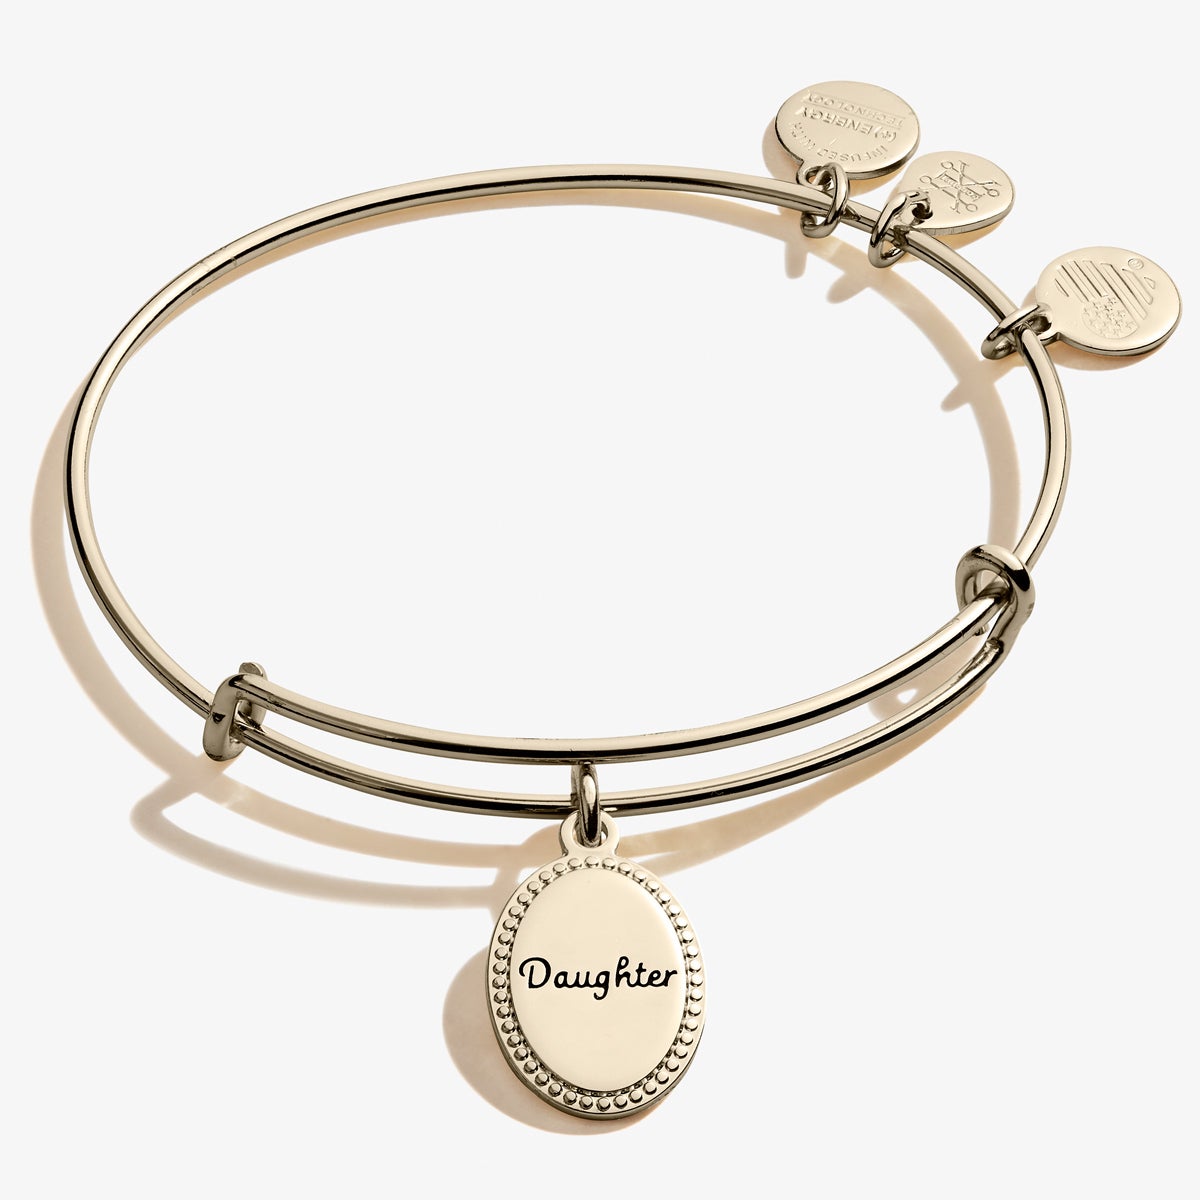 Daughter, 'Most Precious Gift' Charm Bangle